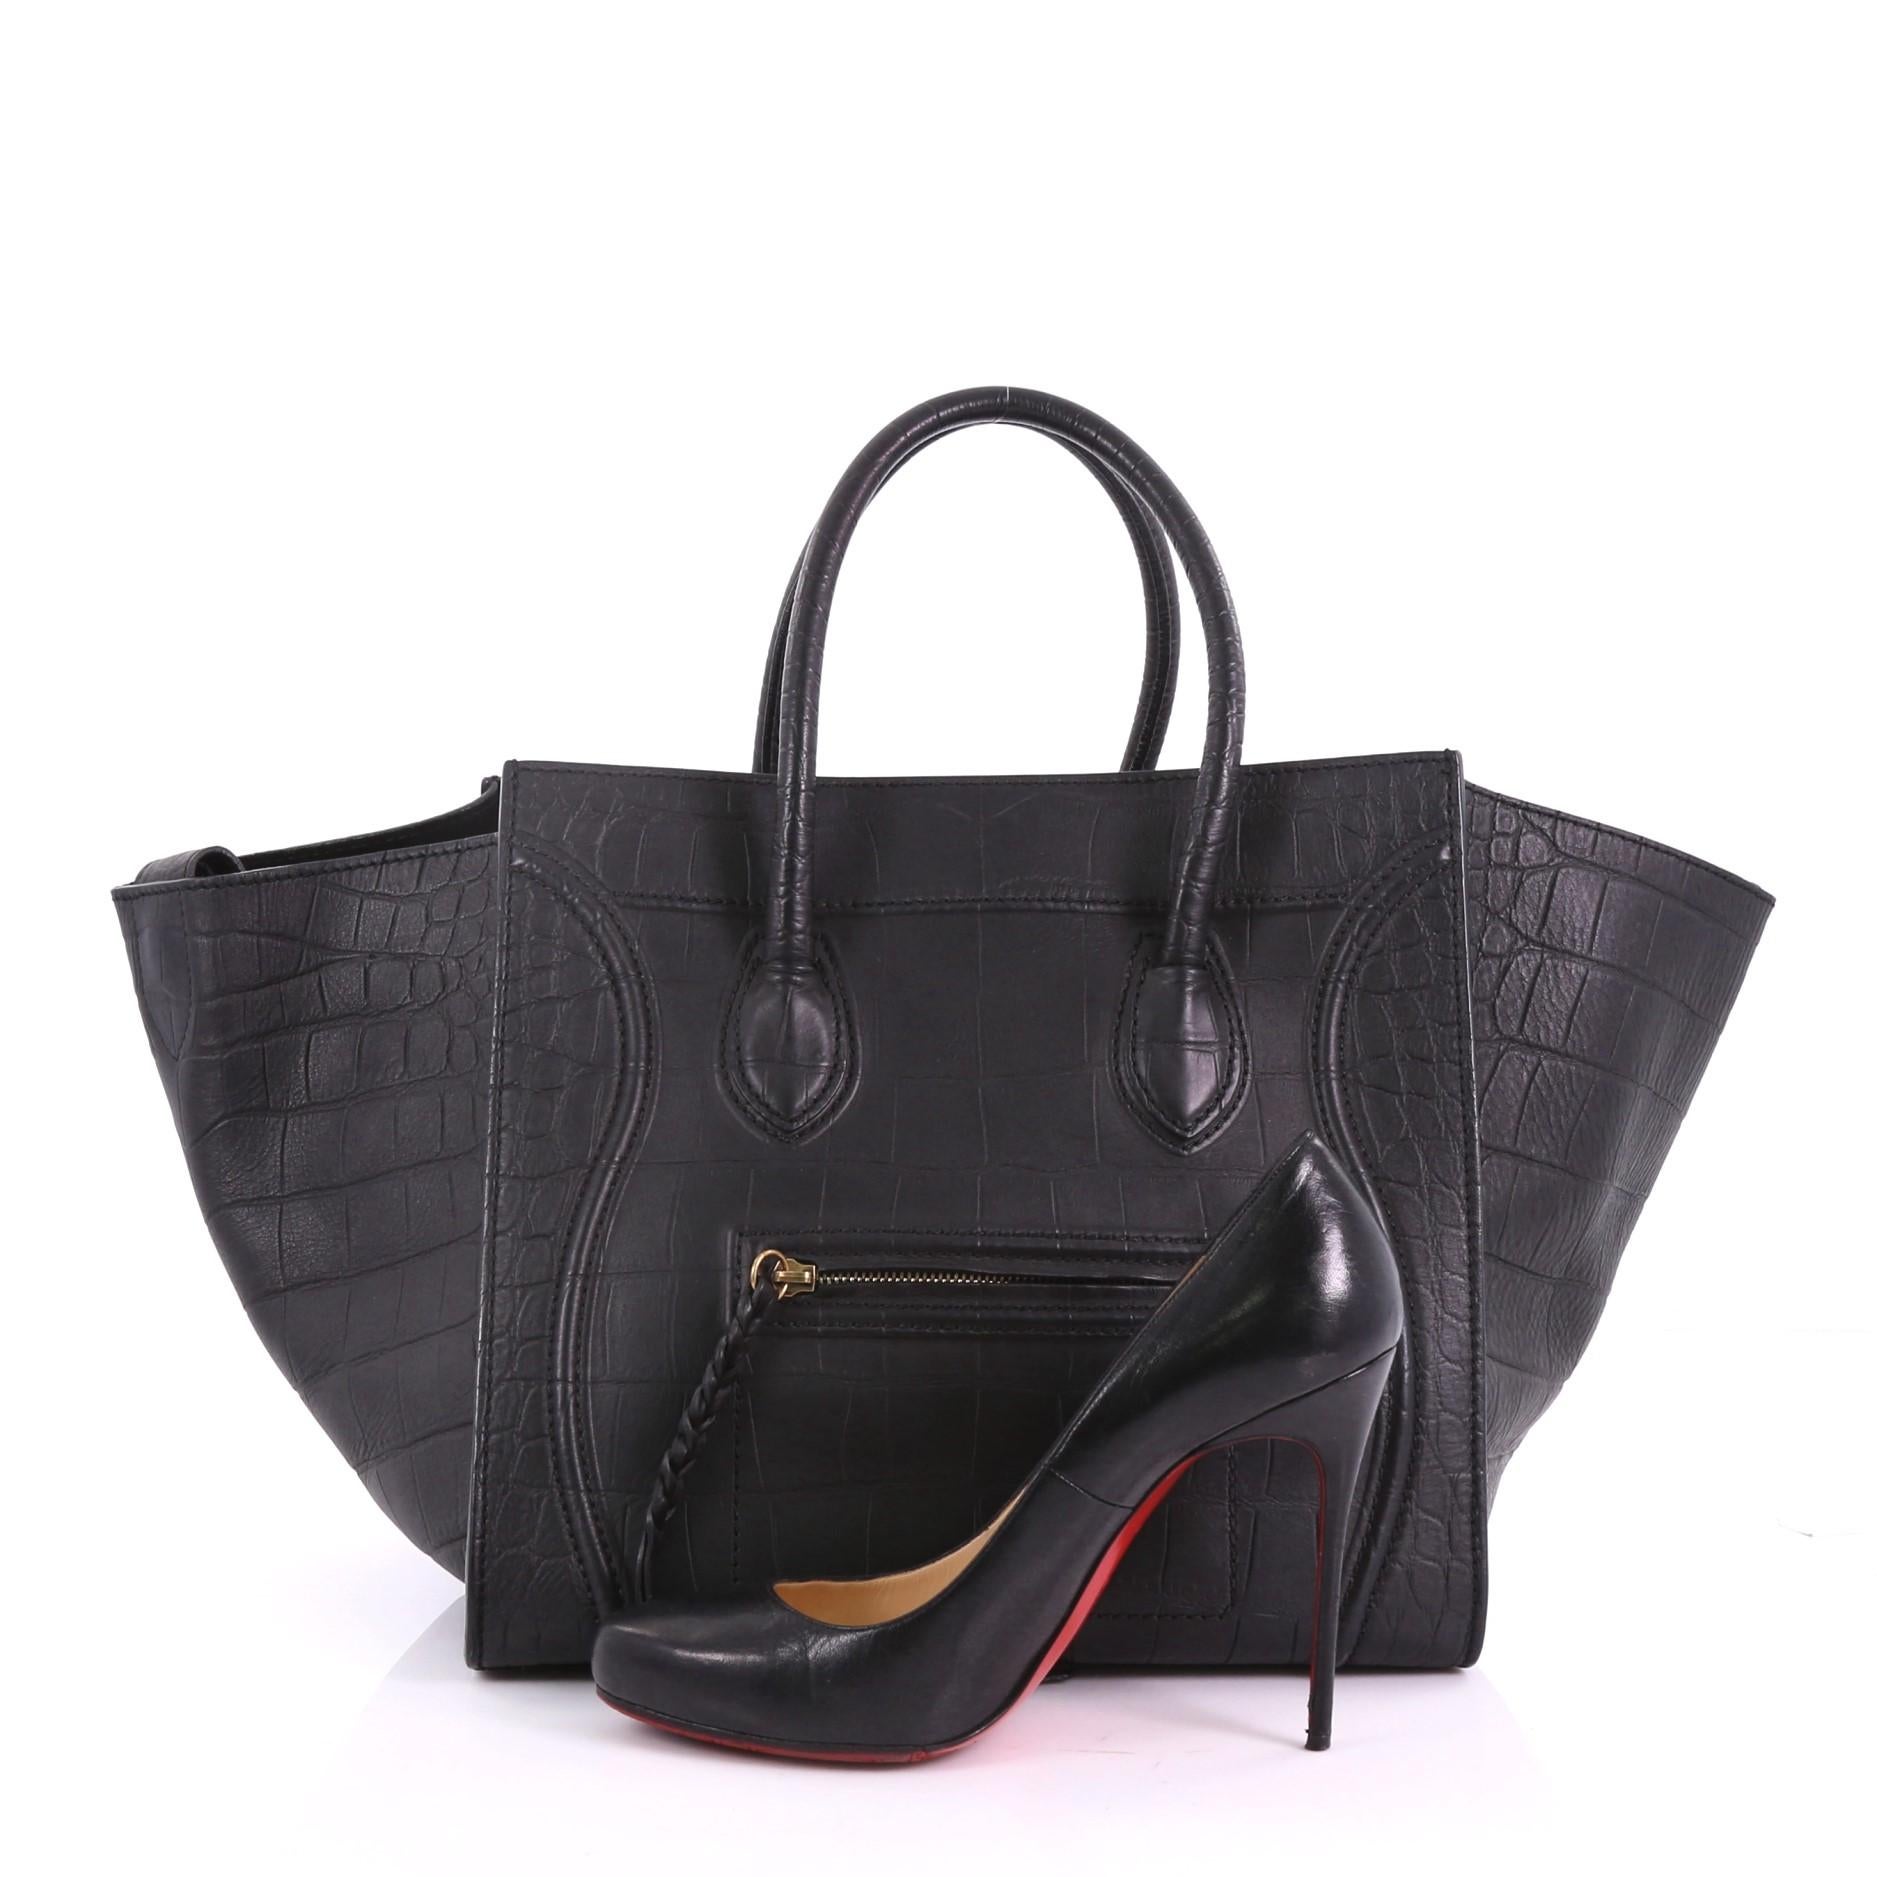 This Celine Phantom Handbag Crocodile Embossed Leather Medium, crafted in black crocodile embossed leather, features dual rolled handles, exterior zip pocket, and gold-tone hardware. It opens to a black suede interior with zip pocket. **Note: Shoe